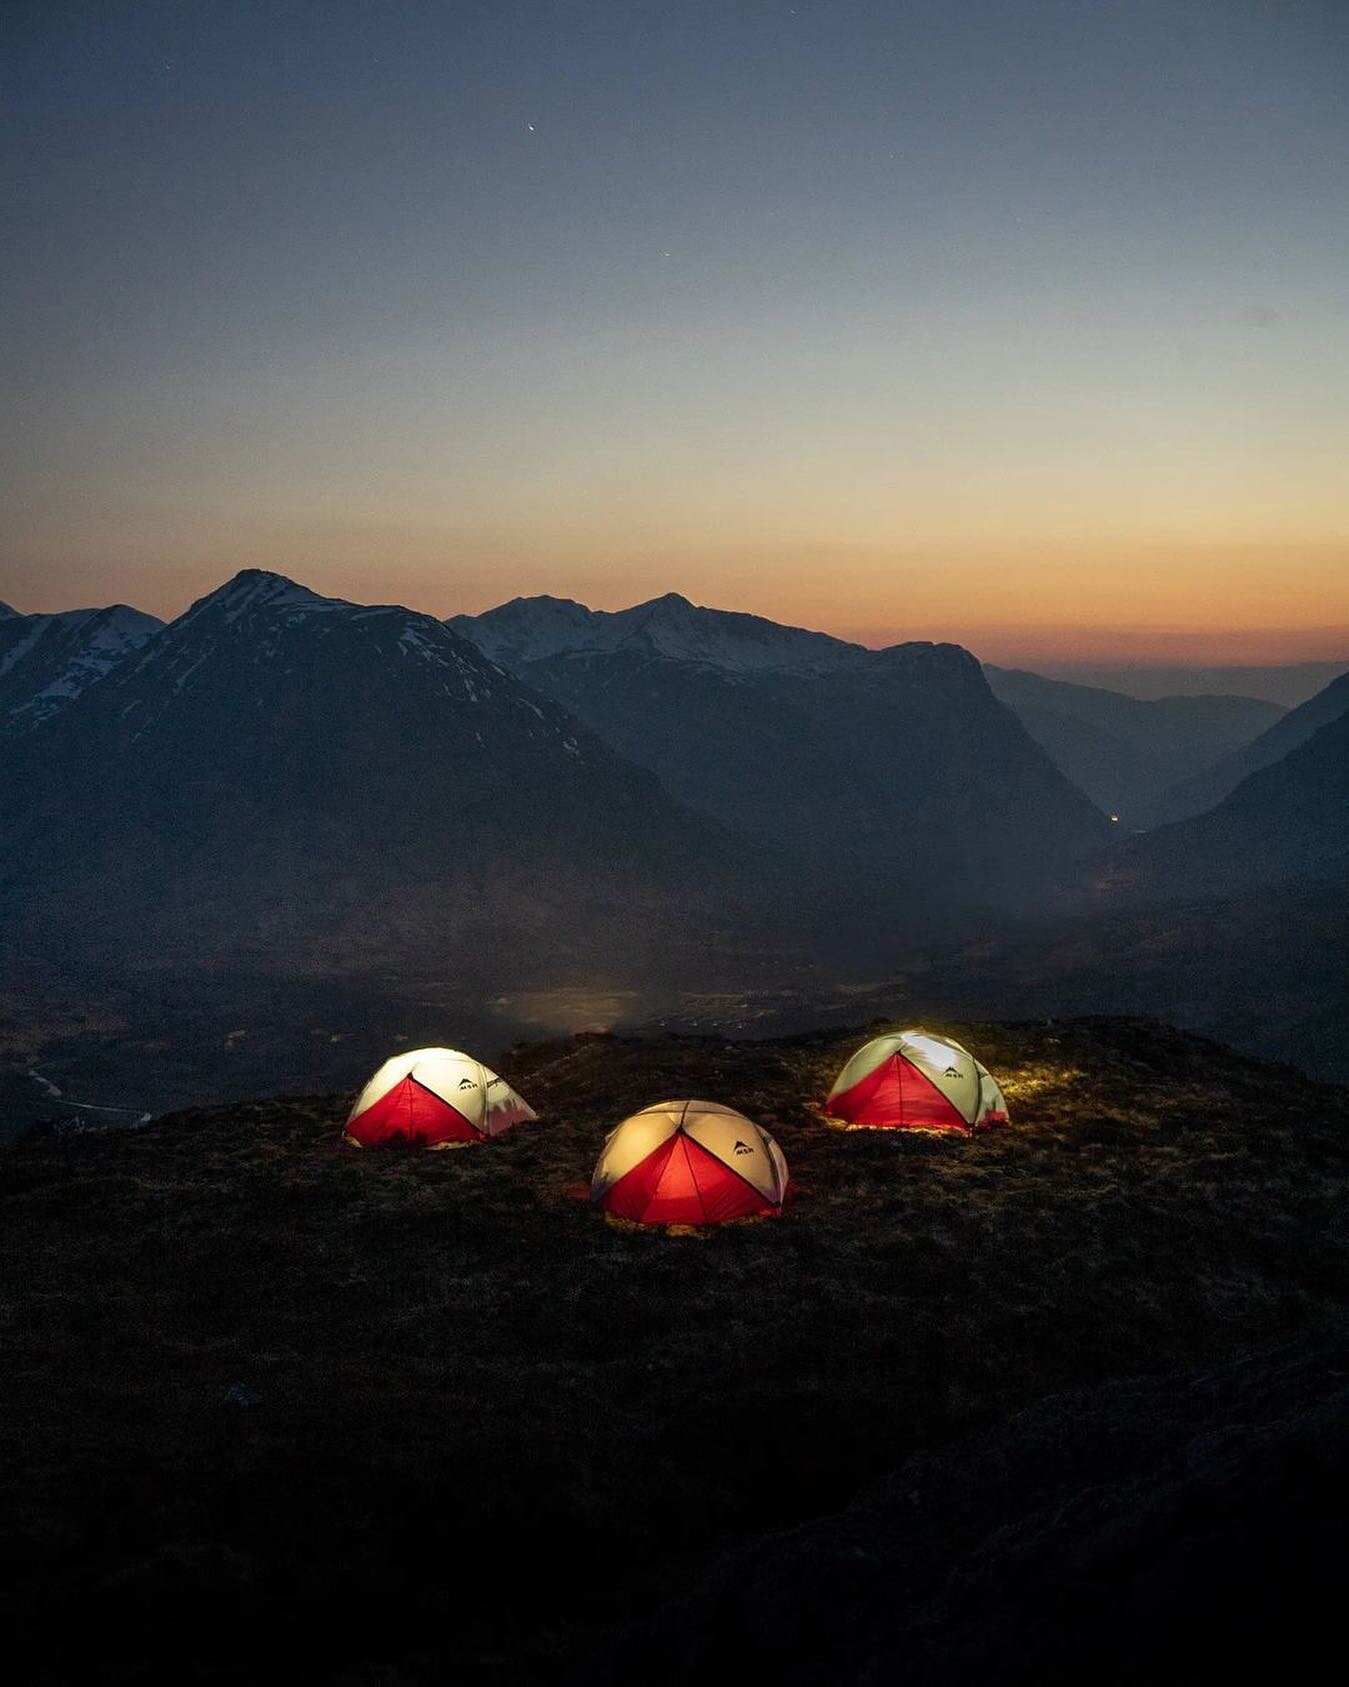 What adventure are you planning this coming weekend? ⛺️ 

Photo thanks to @iamchriswhelan 📸 

#camping #campinglife #mountainscape #whatgetsyououtdoors #hikingculture #adventureseeker #hikingtrails #trekking #beinspired #liveinthemoment #hikinglife 